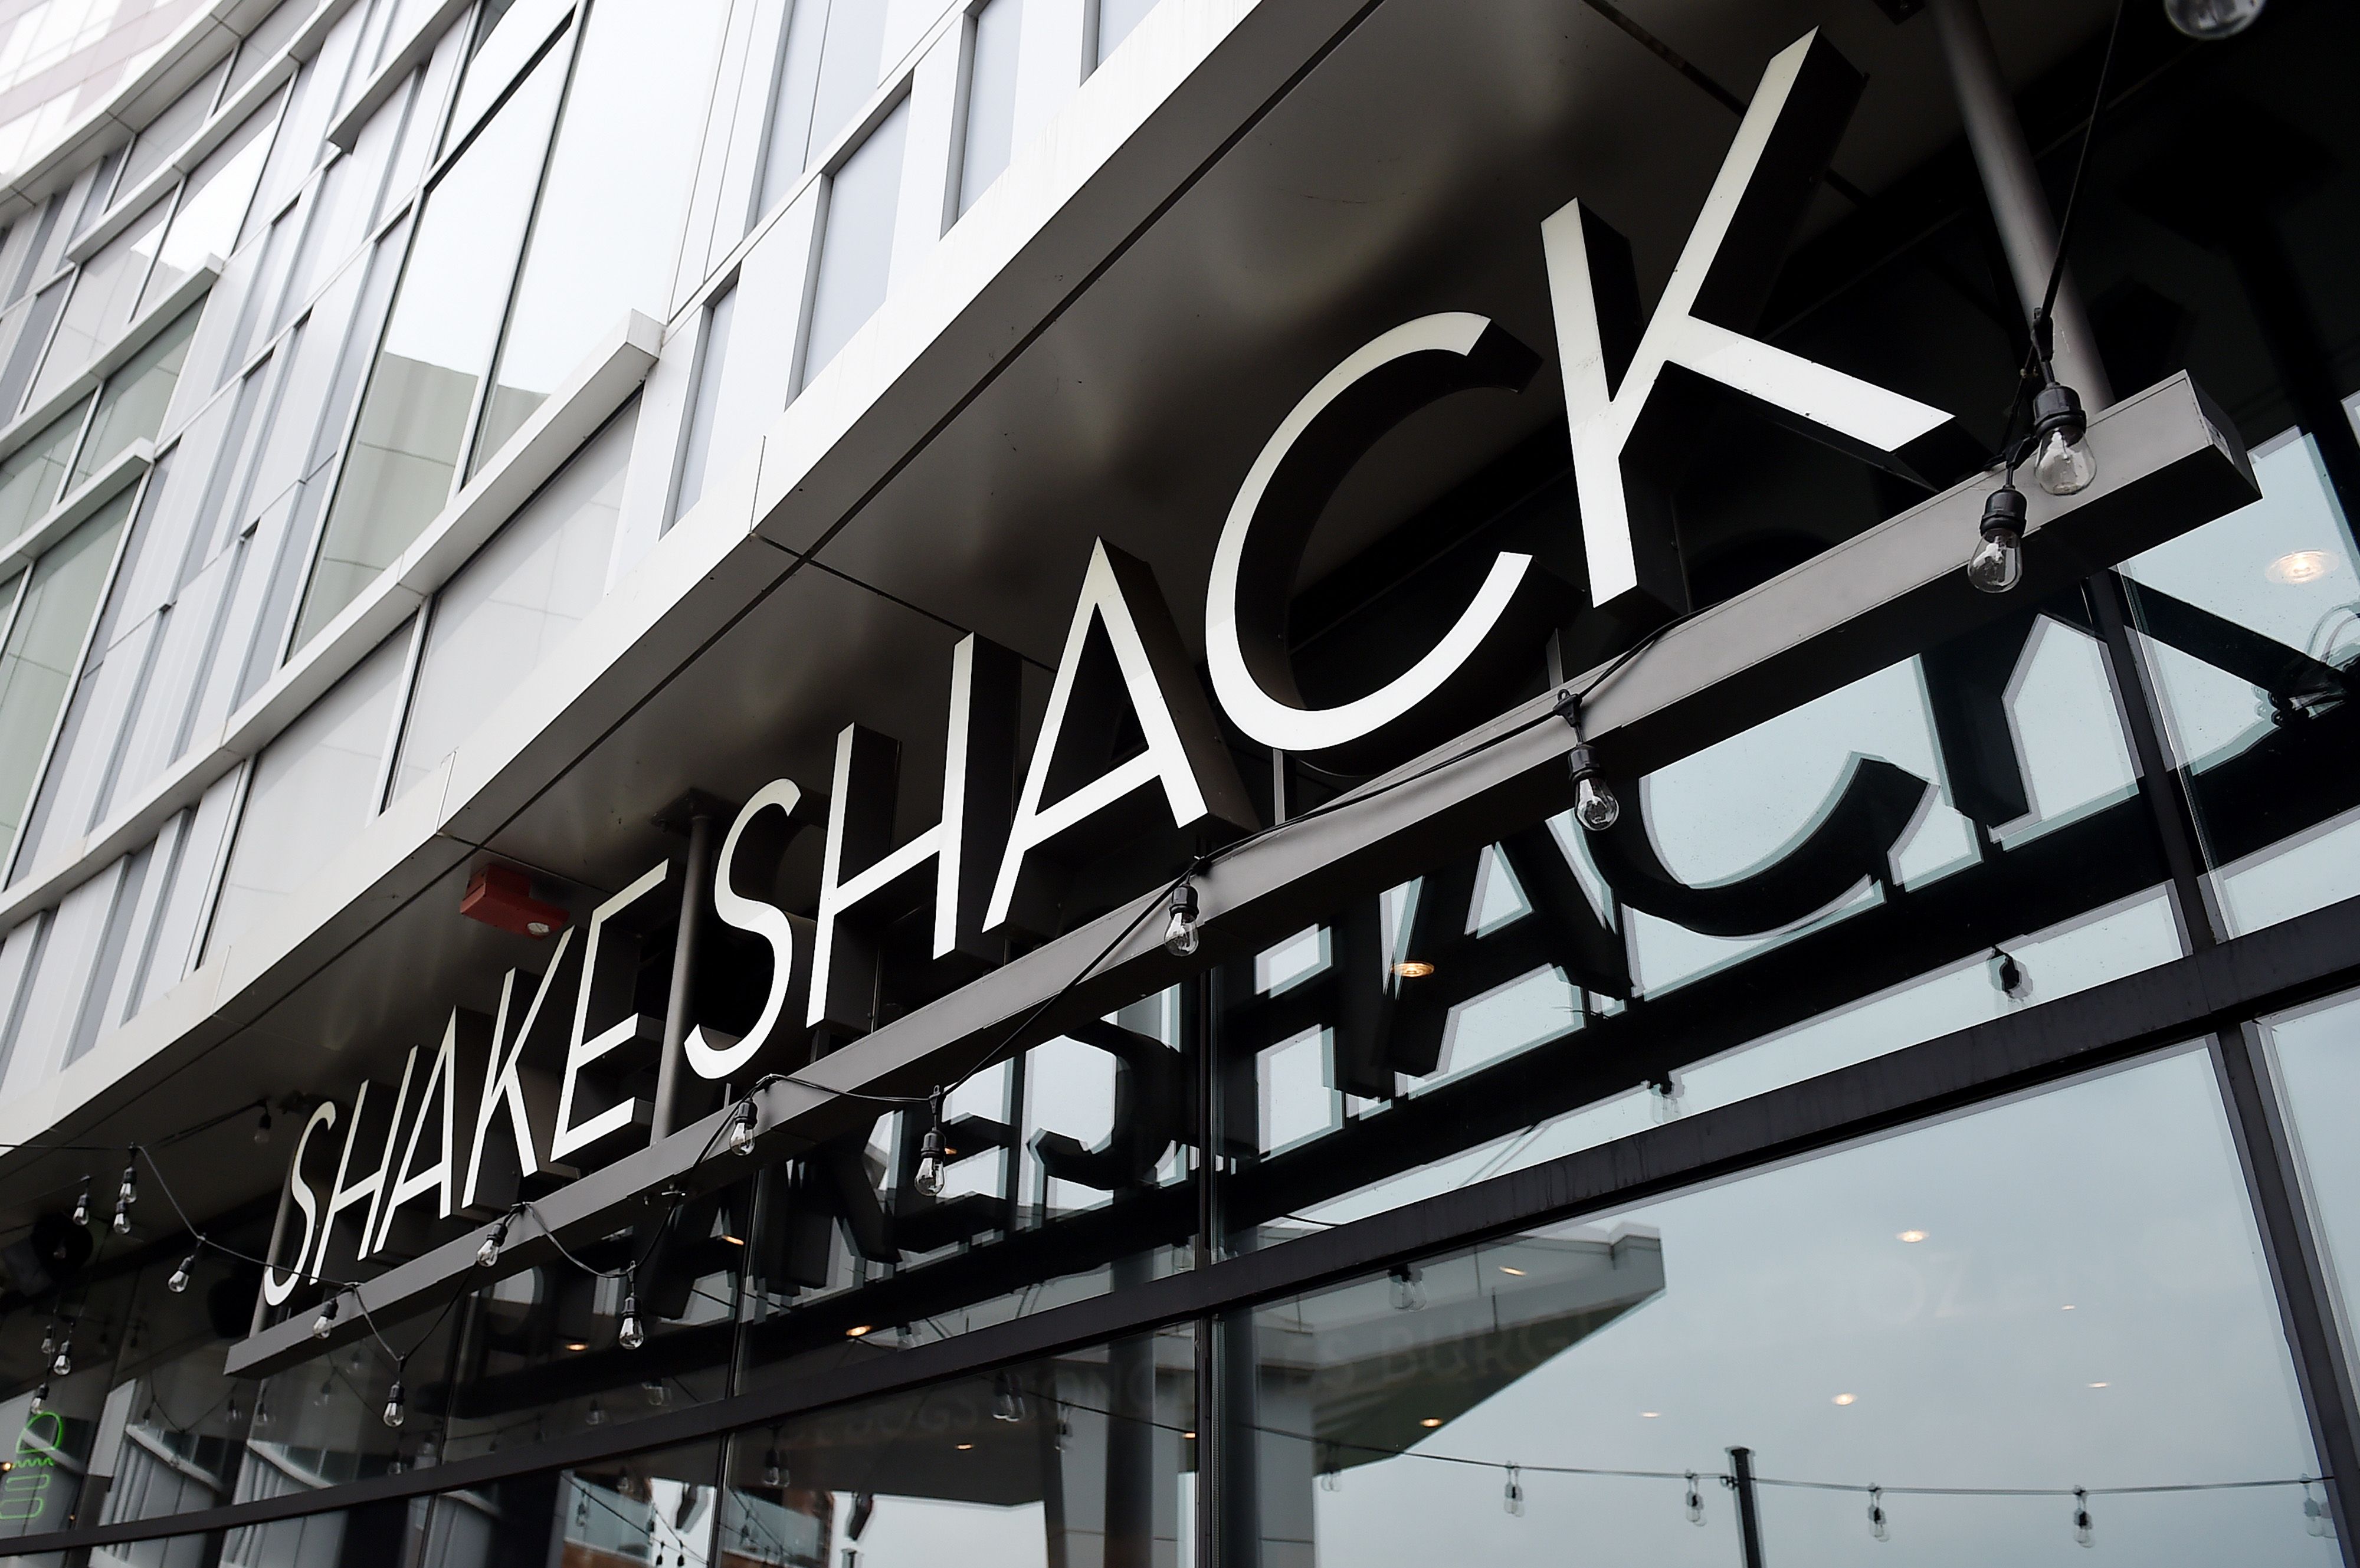 Shake Shack is set to open a new restaurant in St. Pancras International station